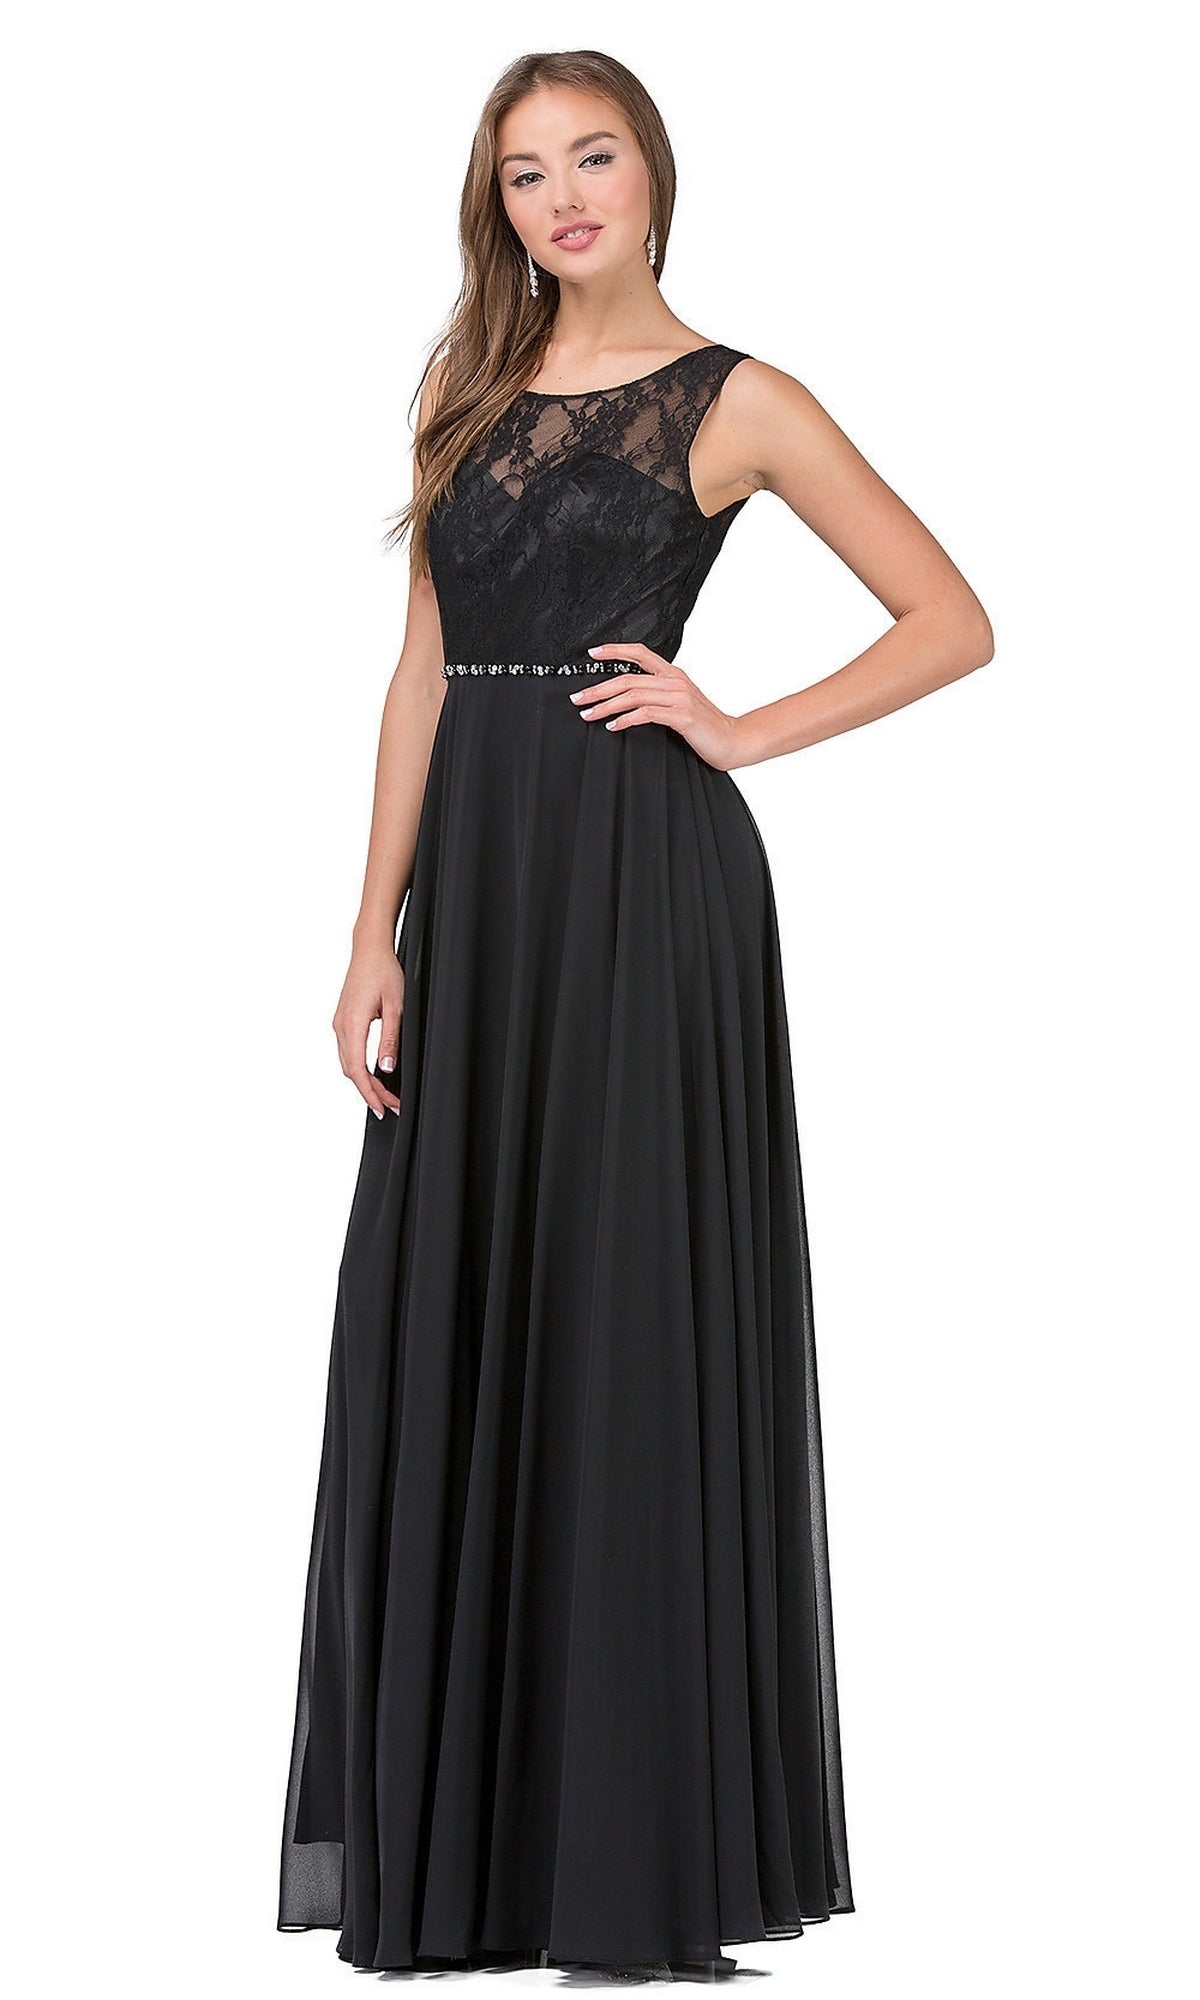 Black Chiffon Formal Evening Gown with Lace Bodice